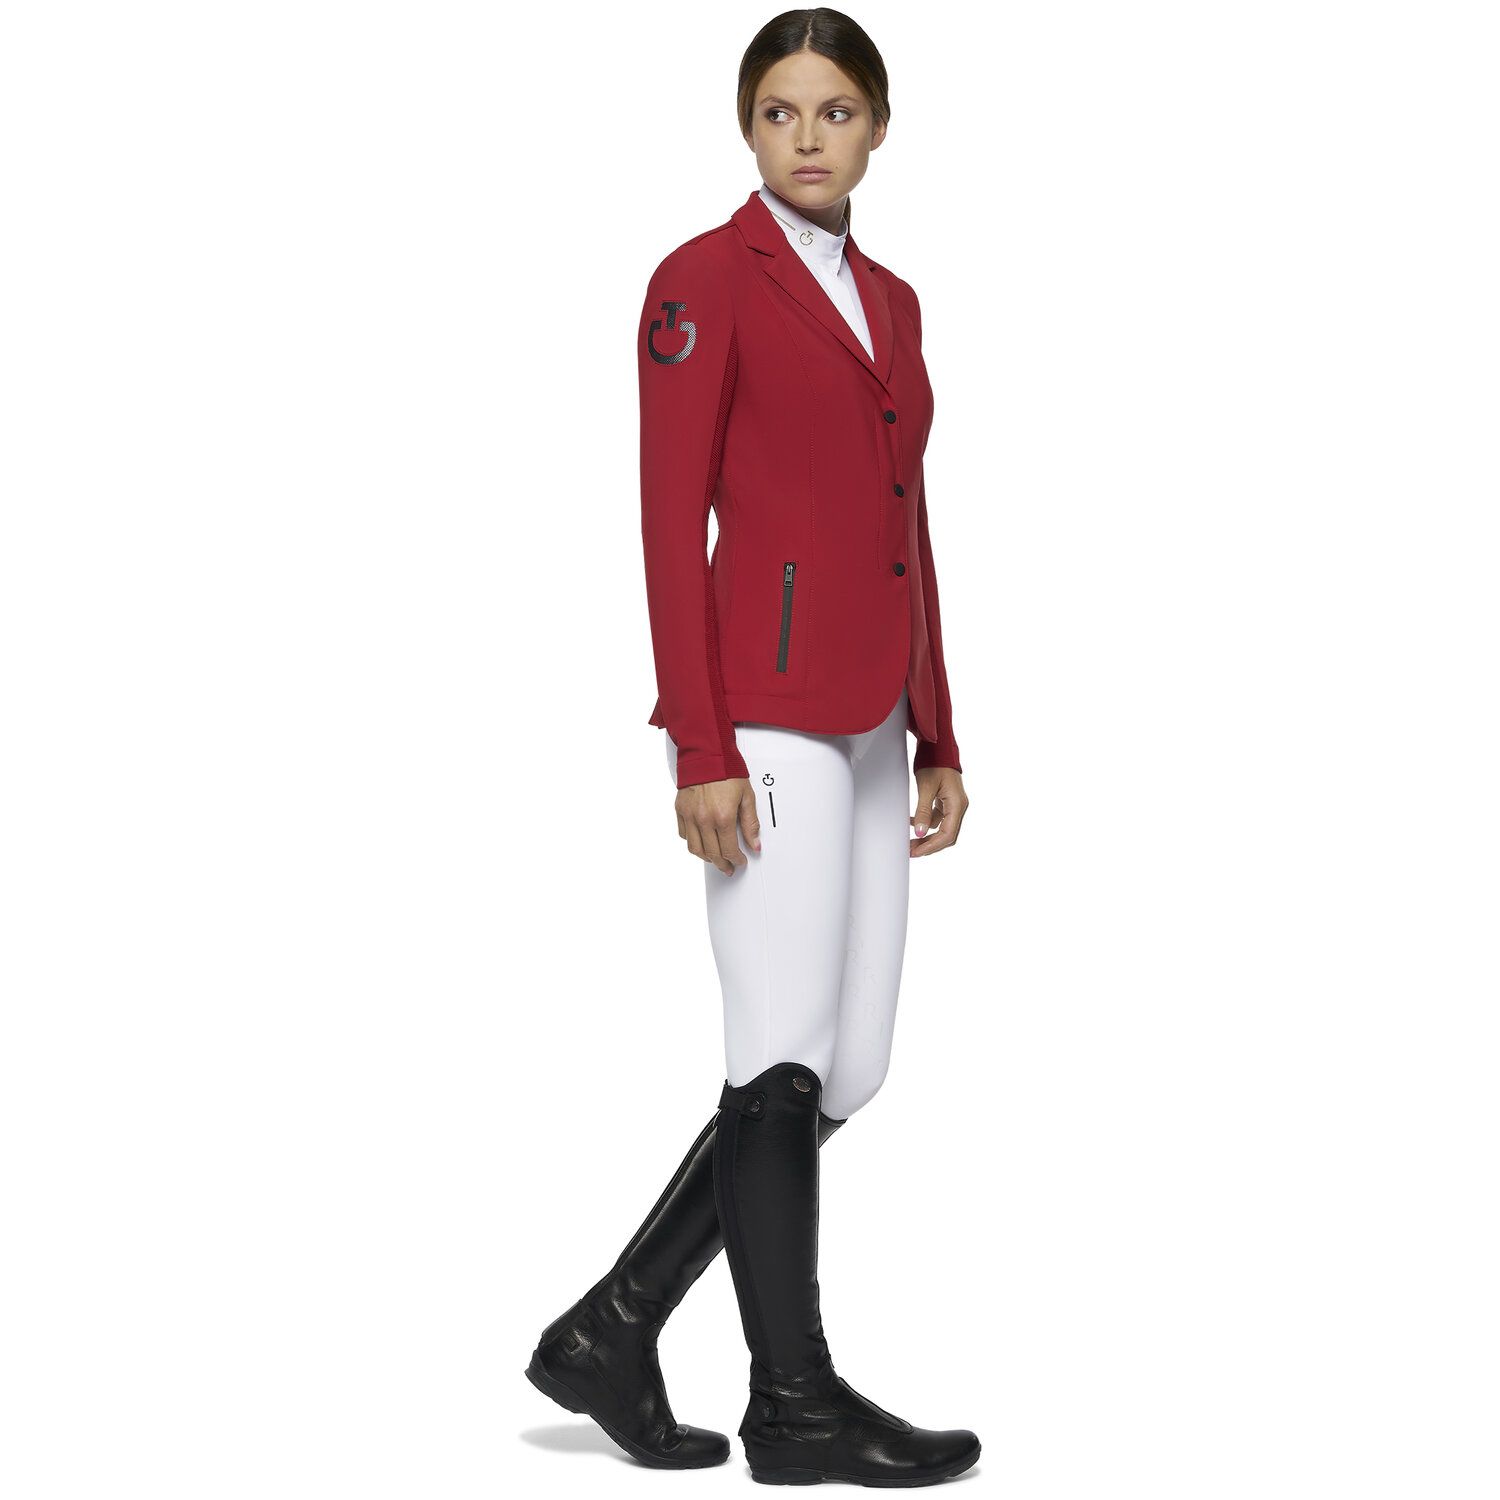 Cavalleria Toscana Women's REVO zip riding jacket with technical knit inserts RED-6